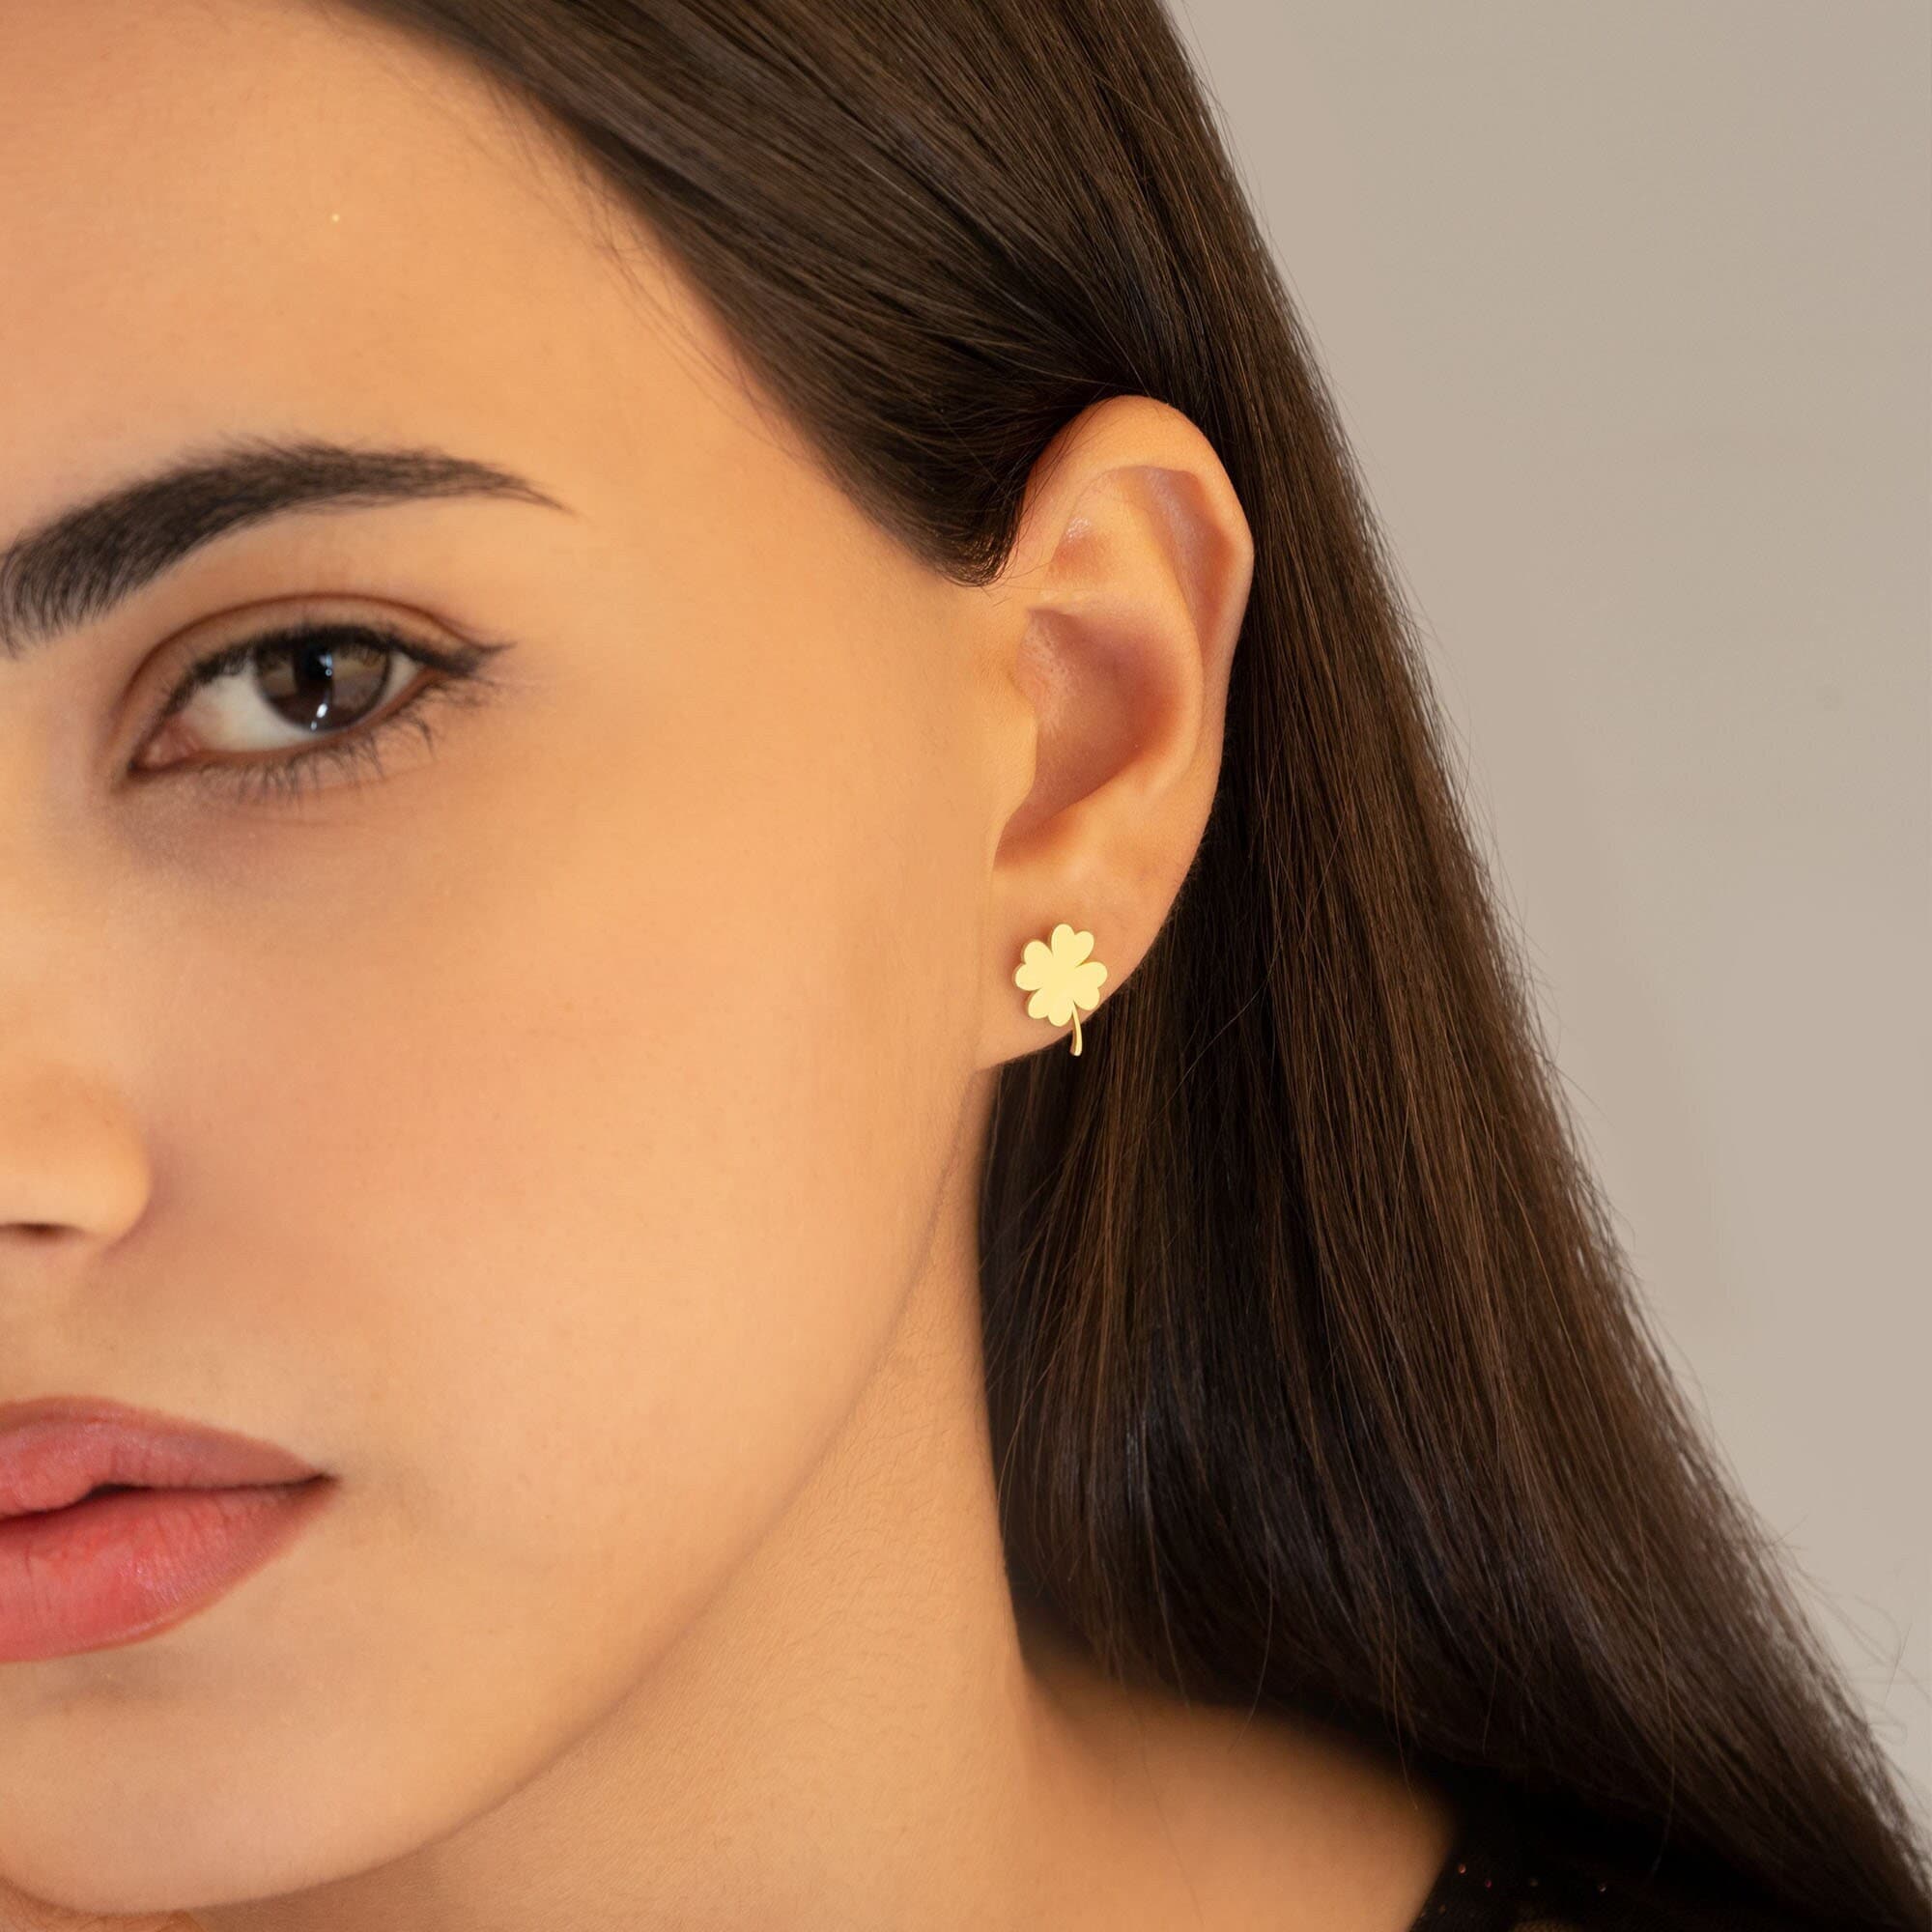 Double Piercing Stud Earrings | 14k Connected Chain Studs – Two of Most